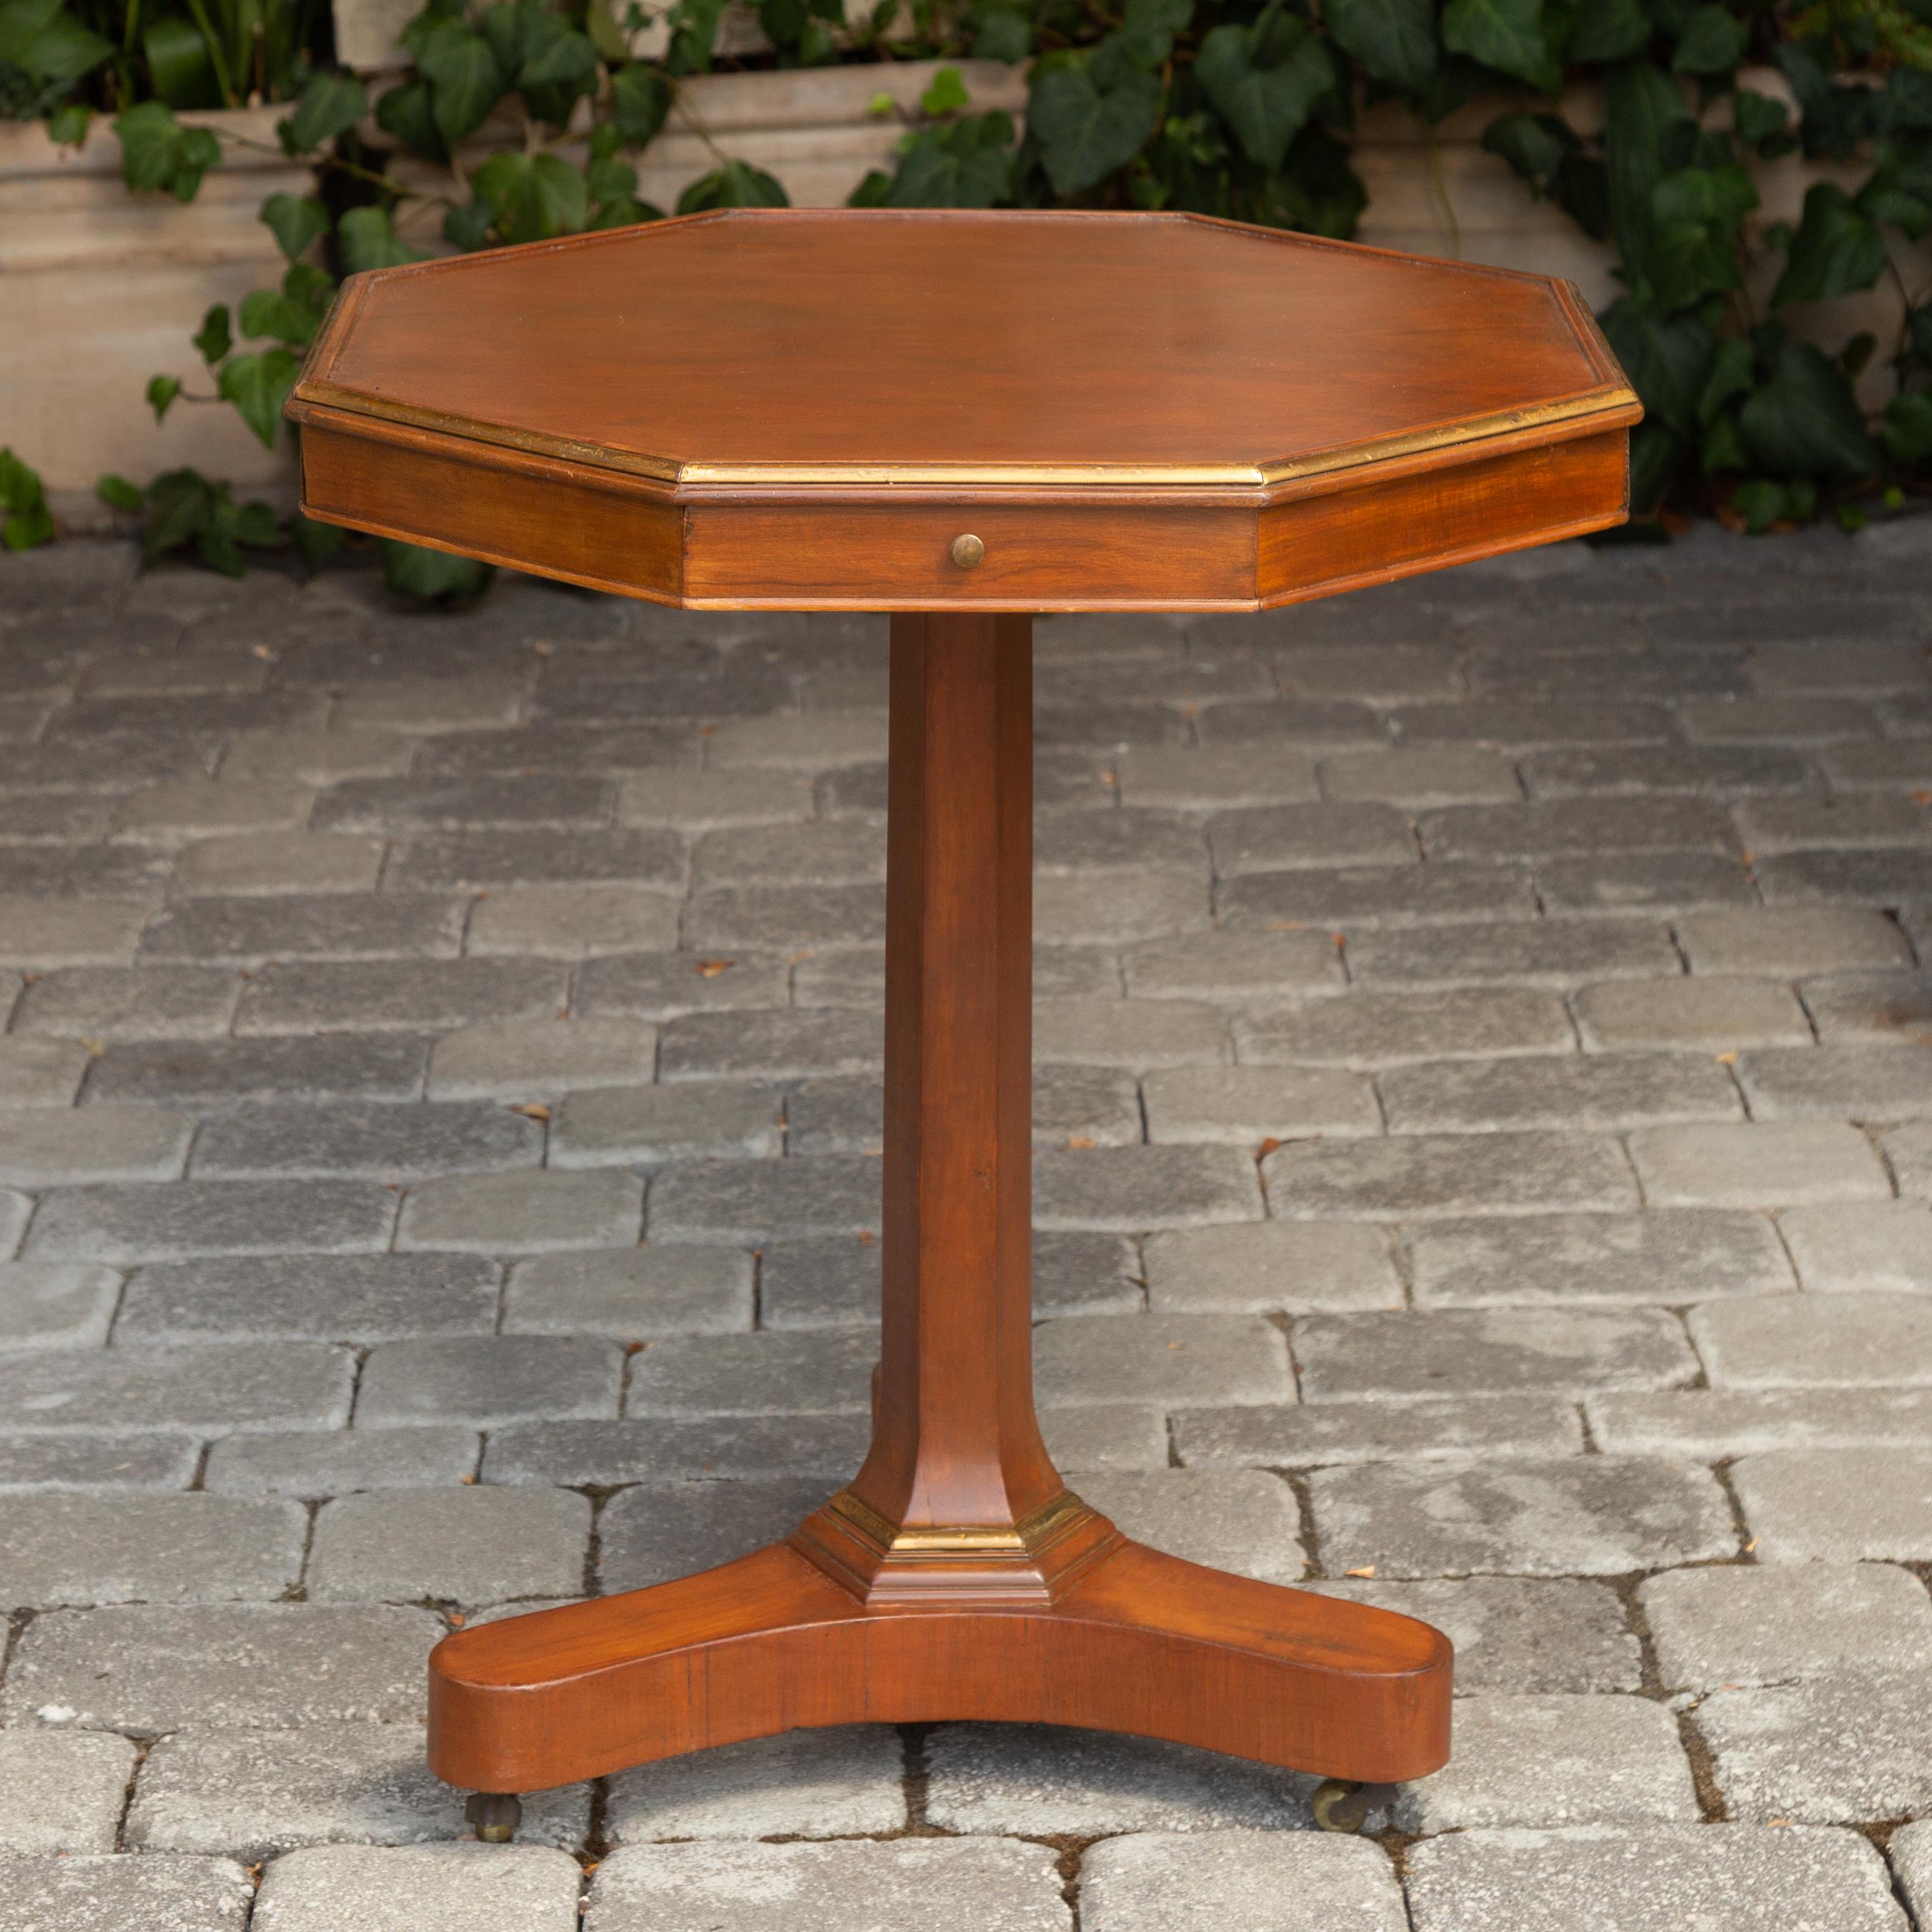 A French walnut octagonal guéridon table from the late 19th century, with copper trim, four drawers and pedestal base. Born in France at the end of the reign of Emperor Napoleon III, this exquisite guéridon table features an octagonal top surrounded